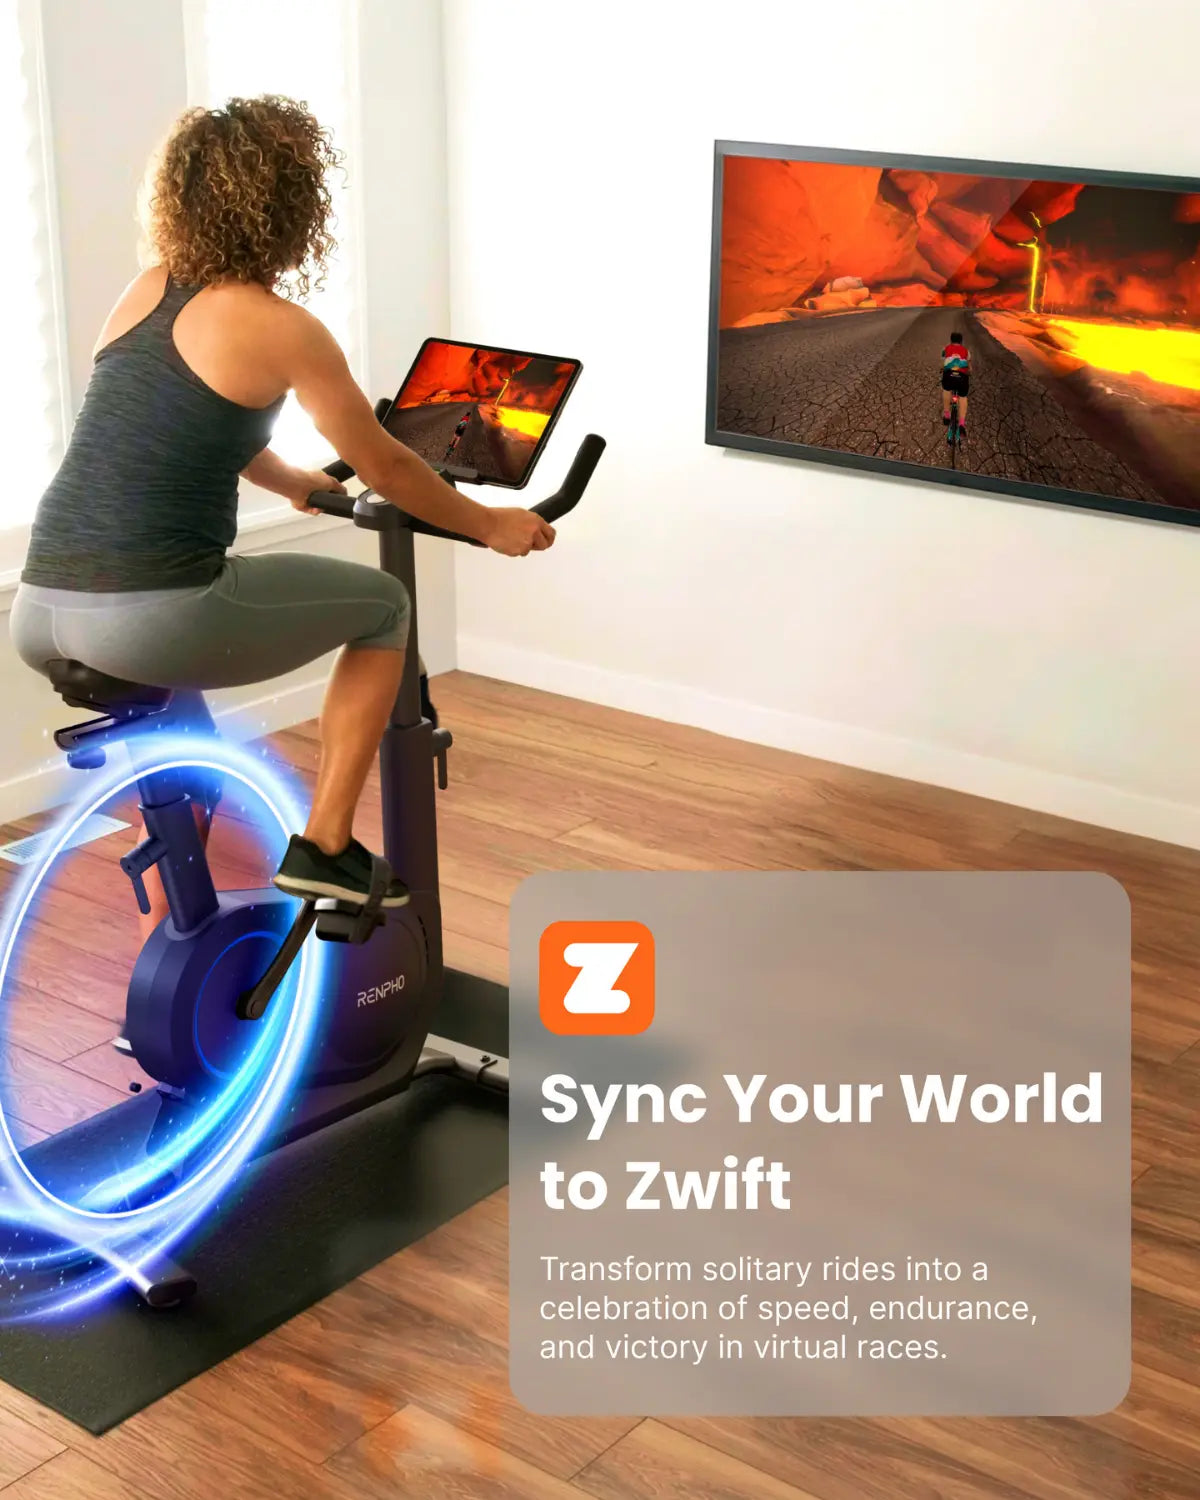 A person with curly hair in athletic wear rides a Renpho EU AI Smart Bike S indoors, viewing a screen displaying bright animated graphics. A wall-mounted TV shows a cyclist on a virtual path. Text overlay reads, "Sync Your World to Zwift," highlighting Diverse Training Programs for an Immersive Fitness Experience.